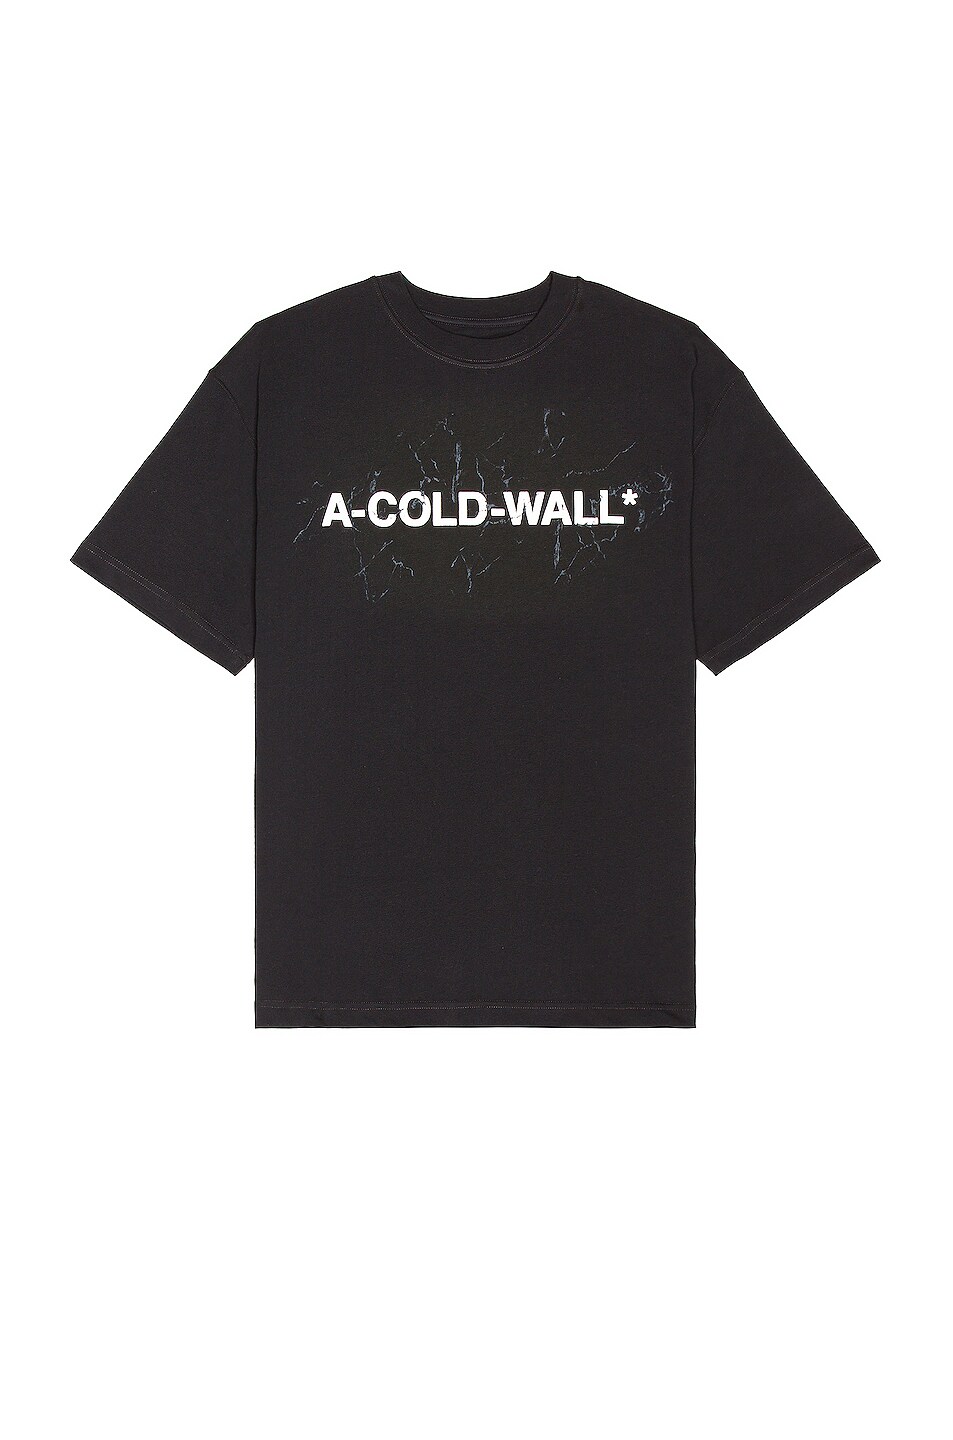 Image 1 of A-COLD-WALL* Logo SS T-Shirt in Black